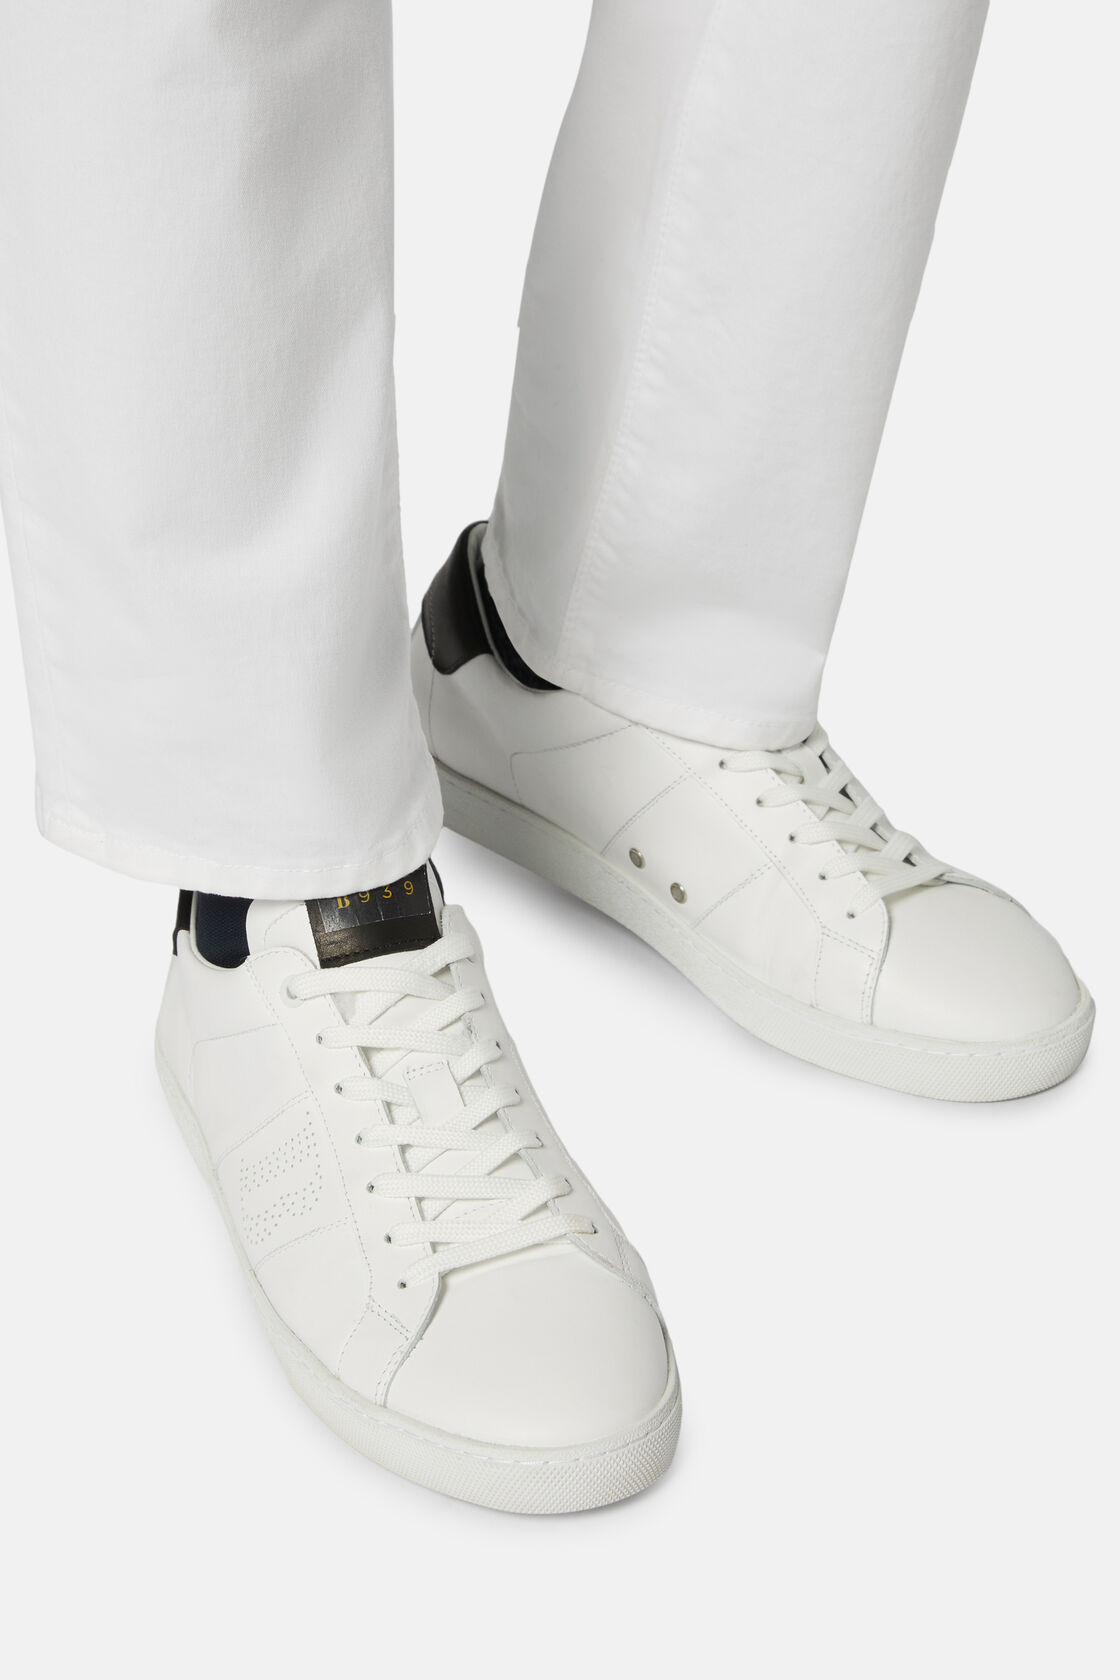 White and Black Leather Trainers, , hi-res